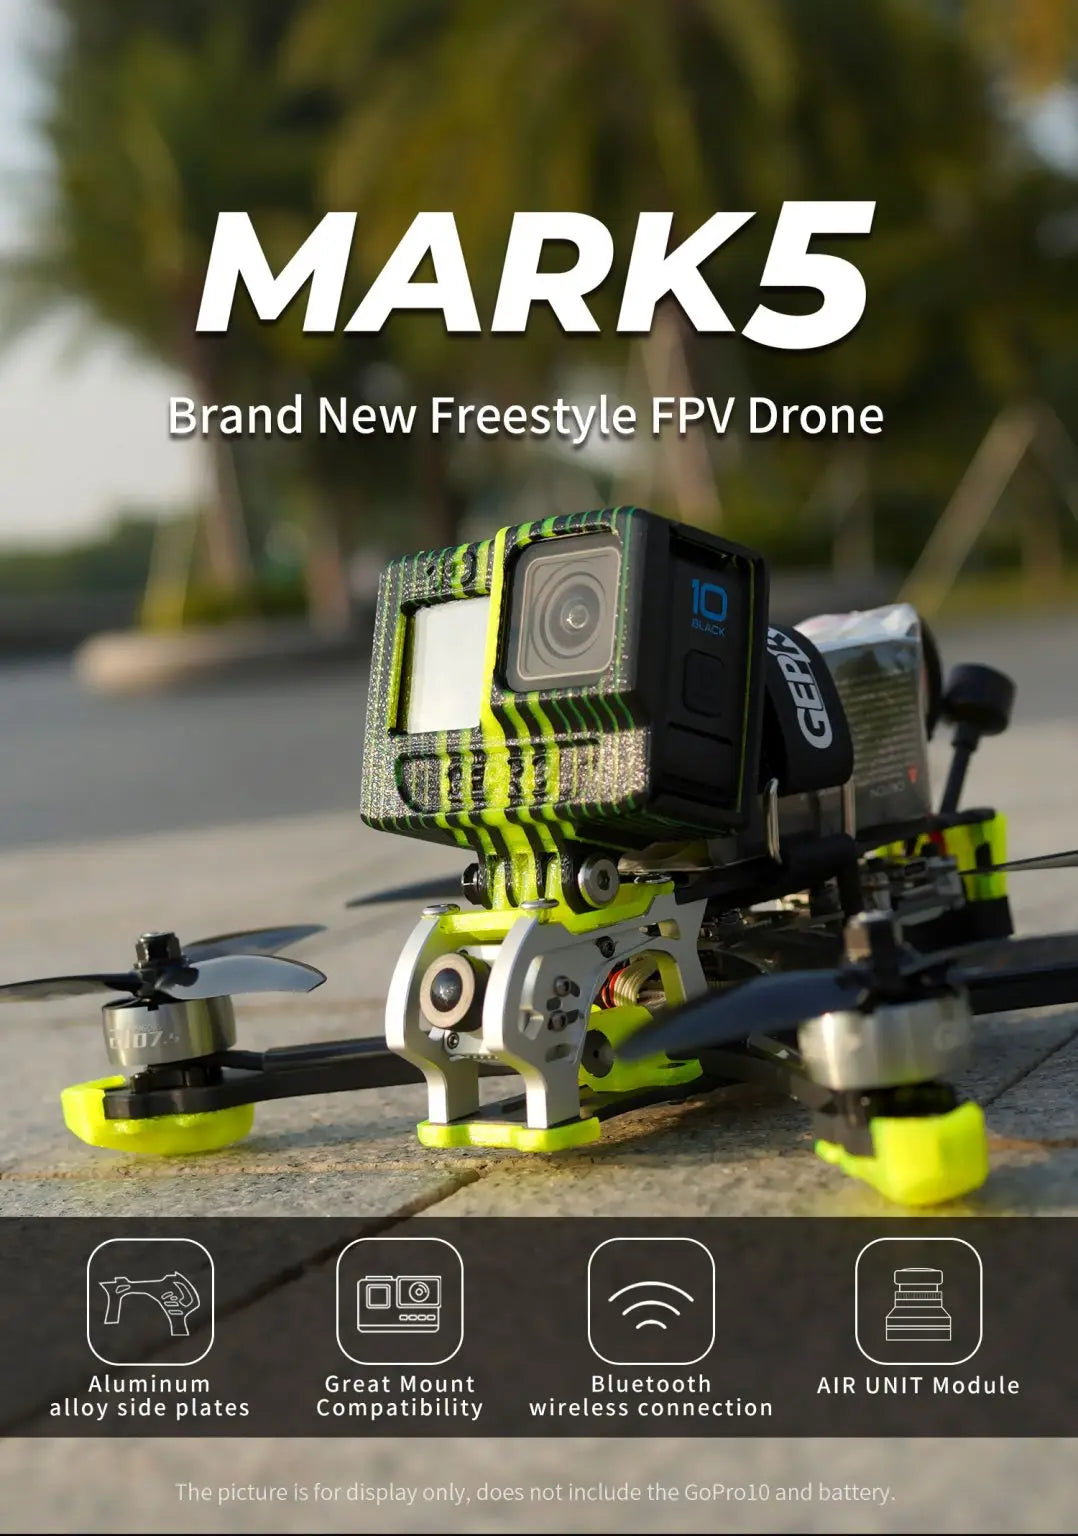 GEPRC MARK5 FPV Drone, MARKS Brand New Freestyle FPV Drone IQ Aluminum Great Mount Bluetooth 